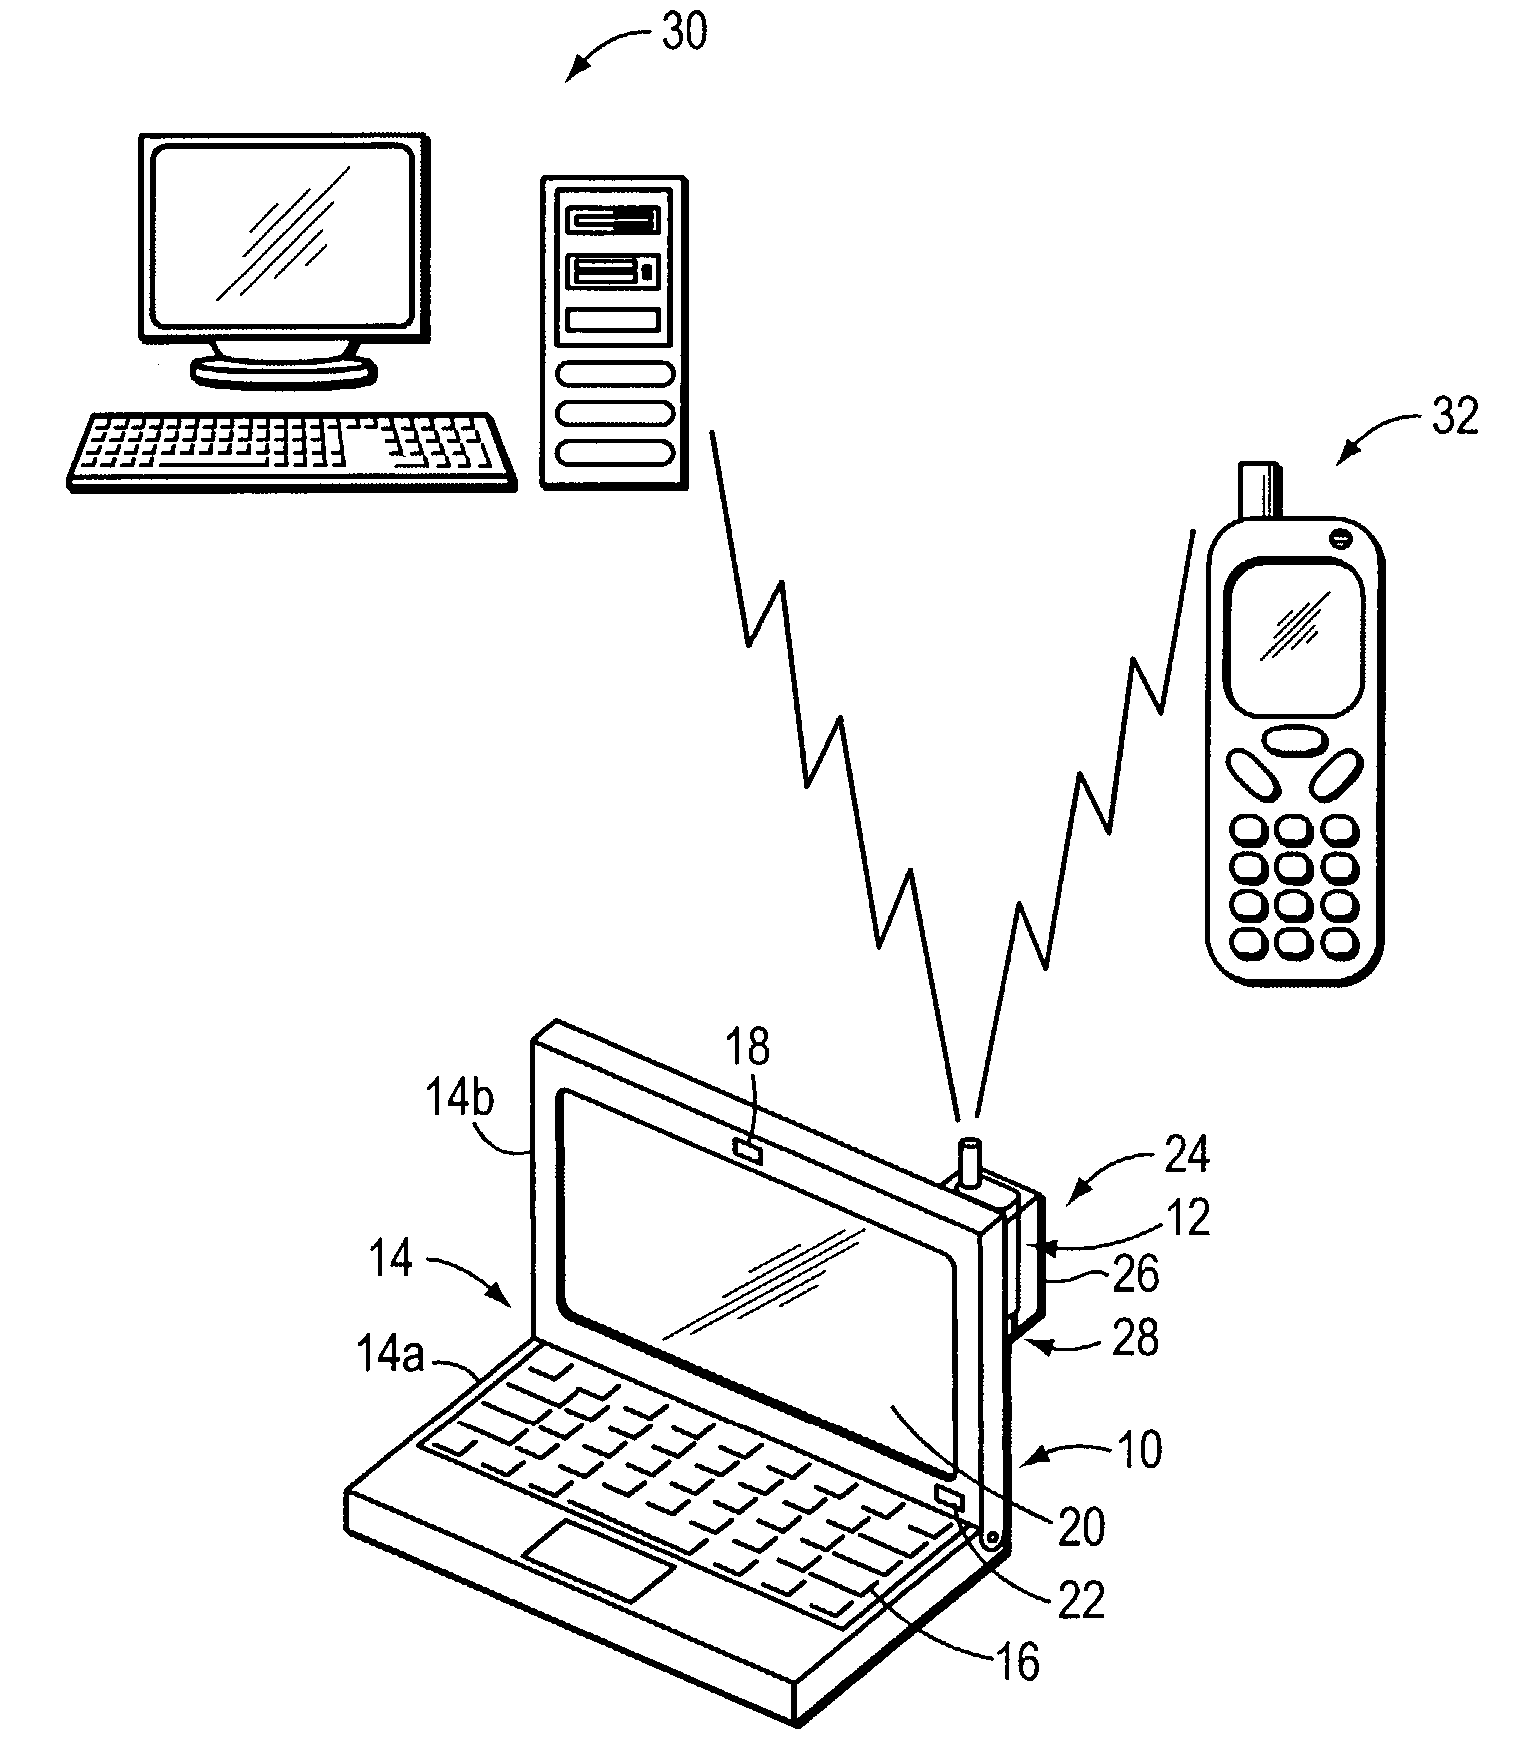 Input-output device with universal phone port